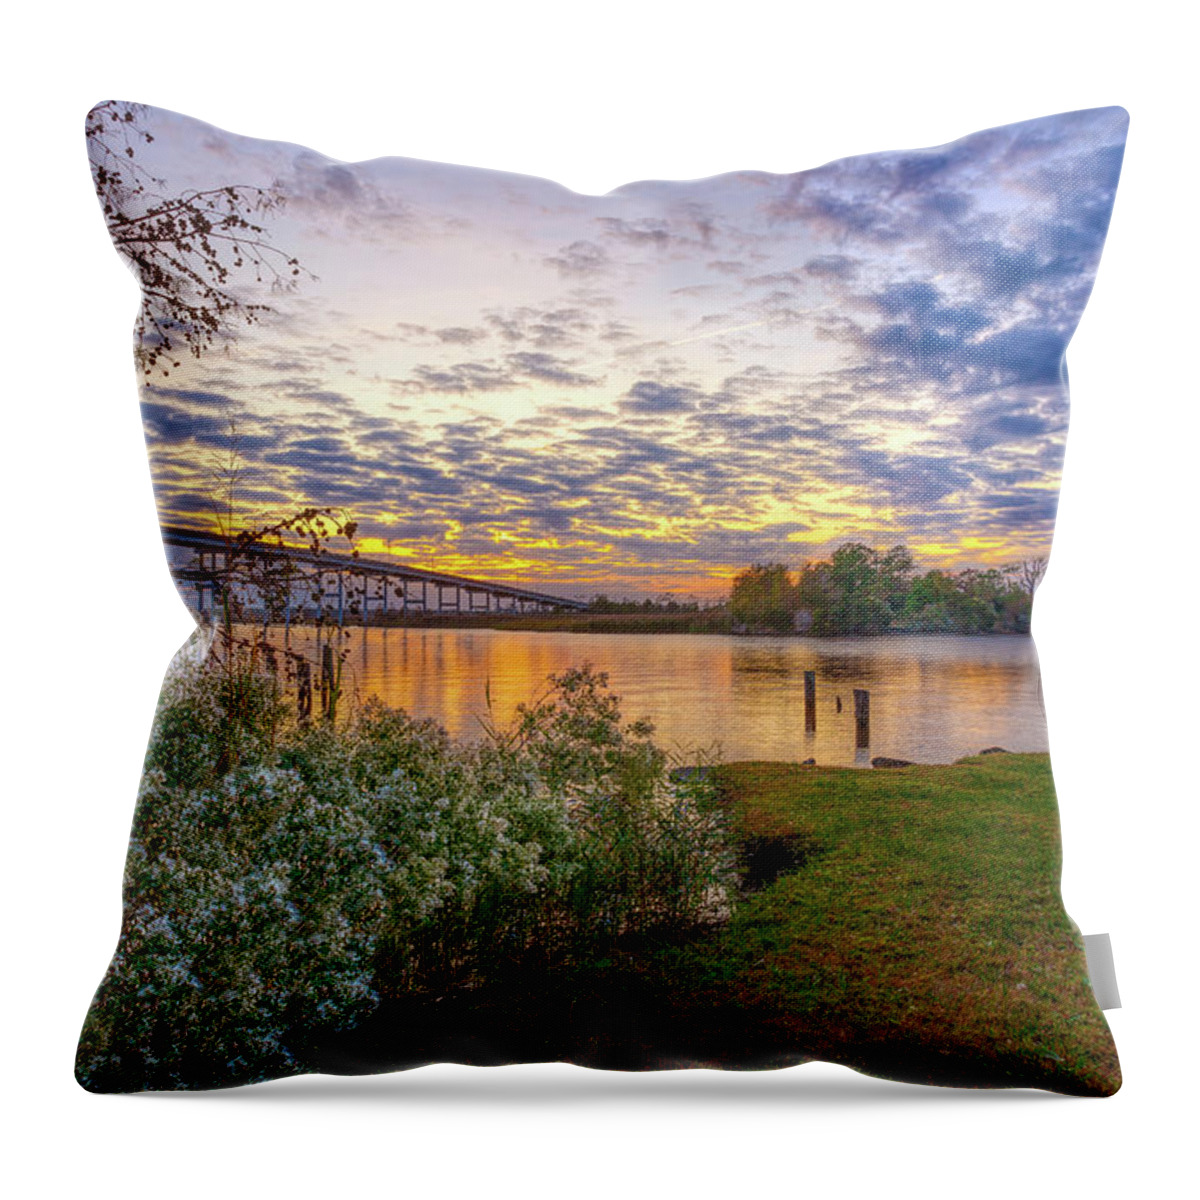 Pungo Throw Pillow featuring the photograph Pungo Ferry Bridge Sunset I by Donna Twiford